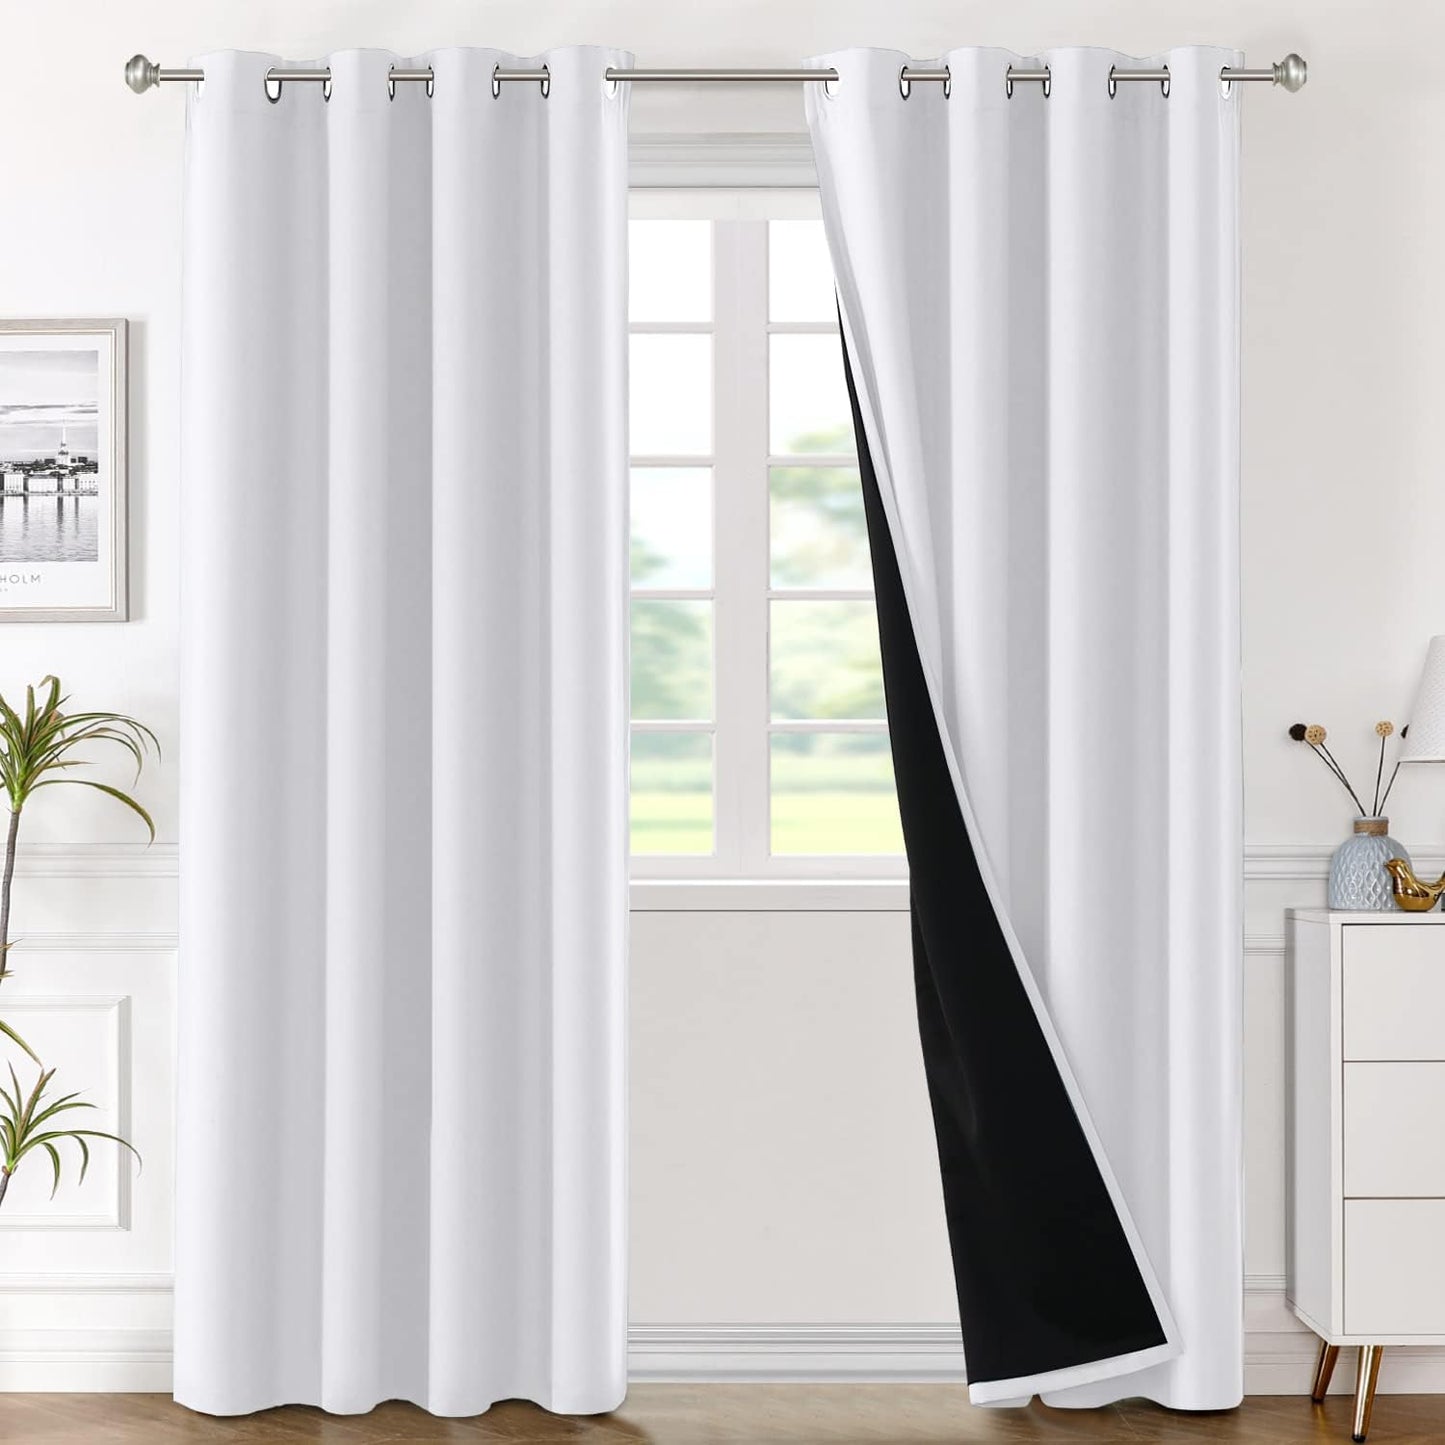 H.VERSAILTEX Blackout Curtains with Liner Backing, Thermal Insulated Curtains for Living Room, Noise Reducing Drapes, White, 52 Inches Wide X 96 Inches Long per Panel, Set of 2 Panels  H.VERSAILTEX Pearl White 52"W X 96"L 